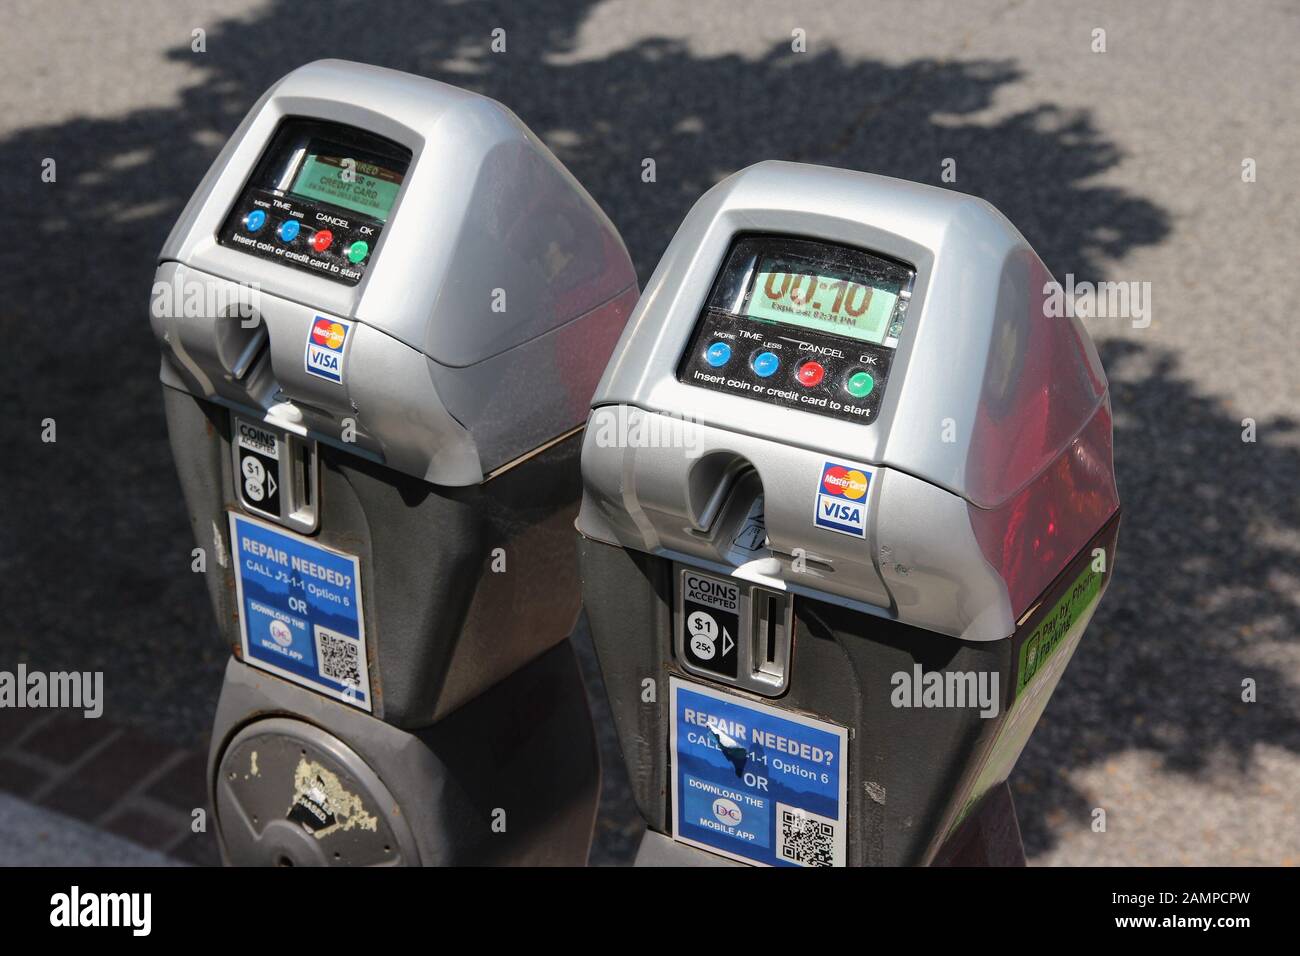 WASHINGTON DC, USA - JUNE 14, 2013: Parking meters in Washington DC. 646,000 people live in Washington DC (2013) making it the 23rd most populous US c Stock Photo